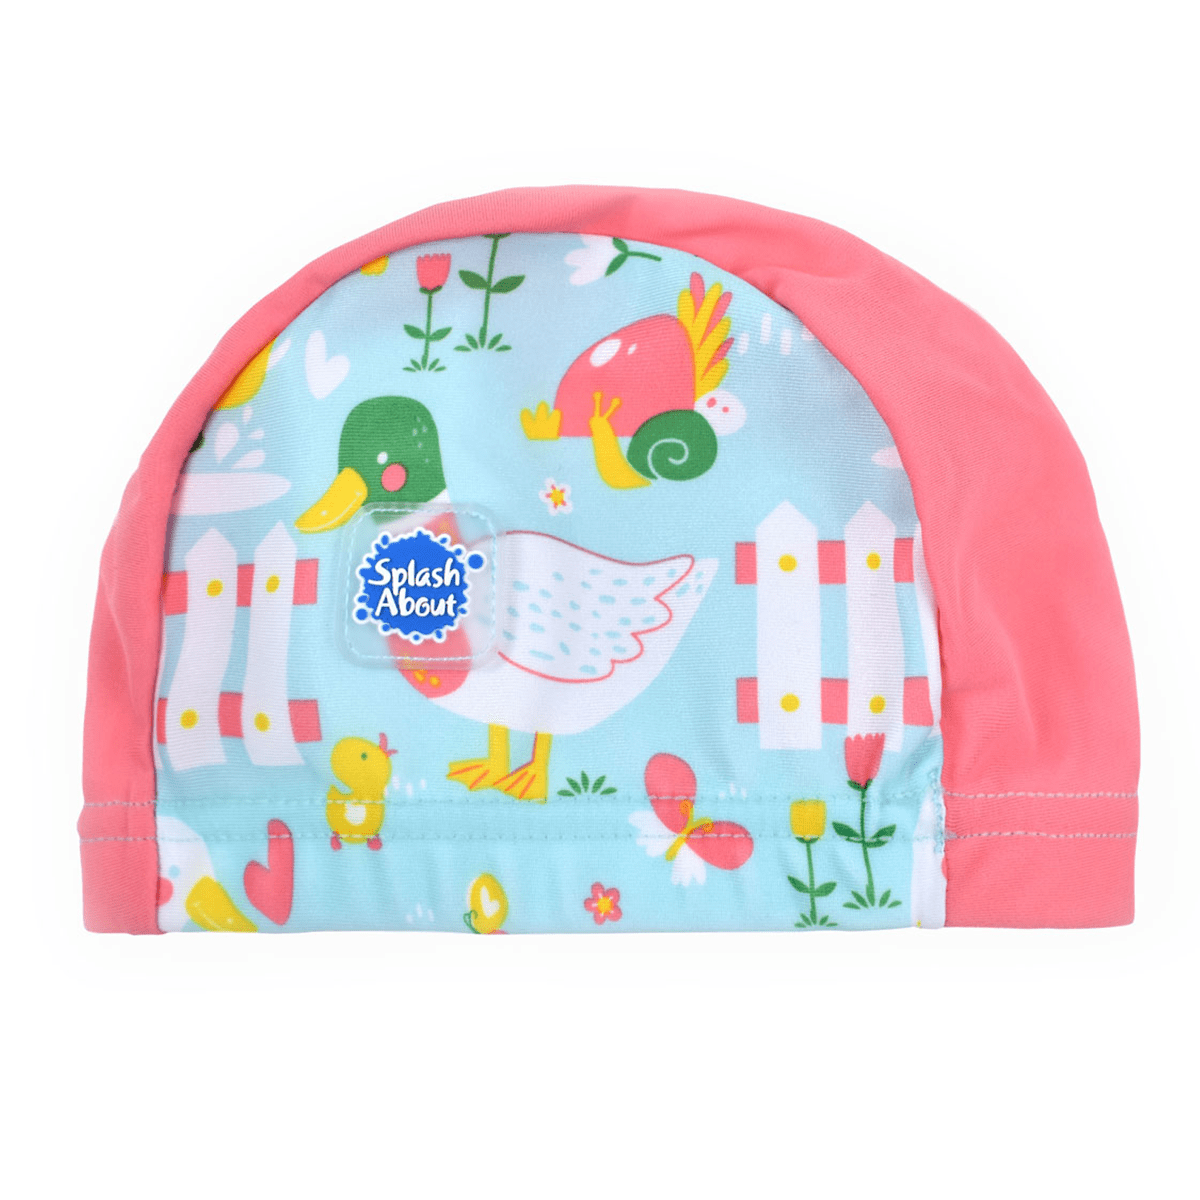 Cute baby swim hat in light blue with pink trims and little ducks themed print.